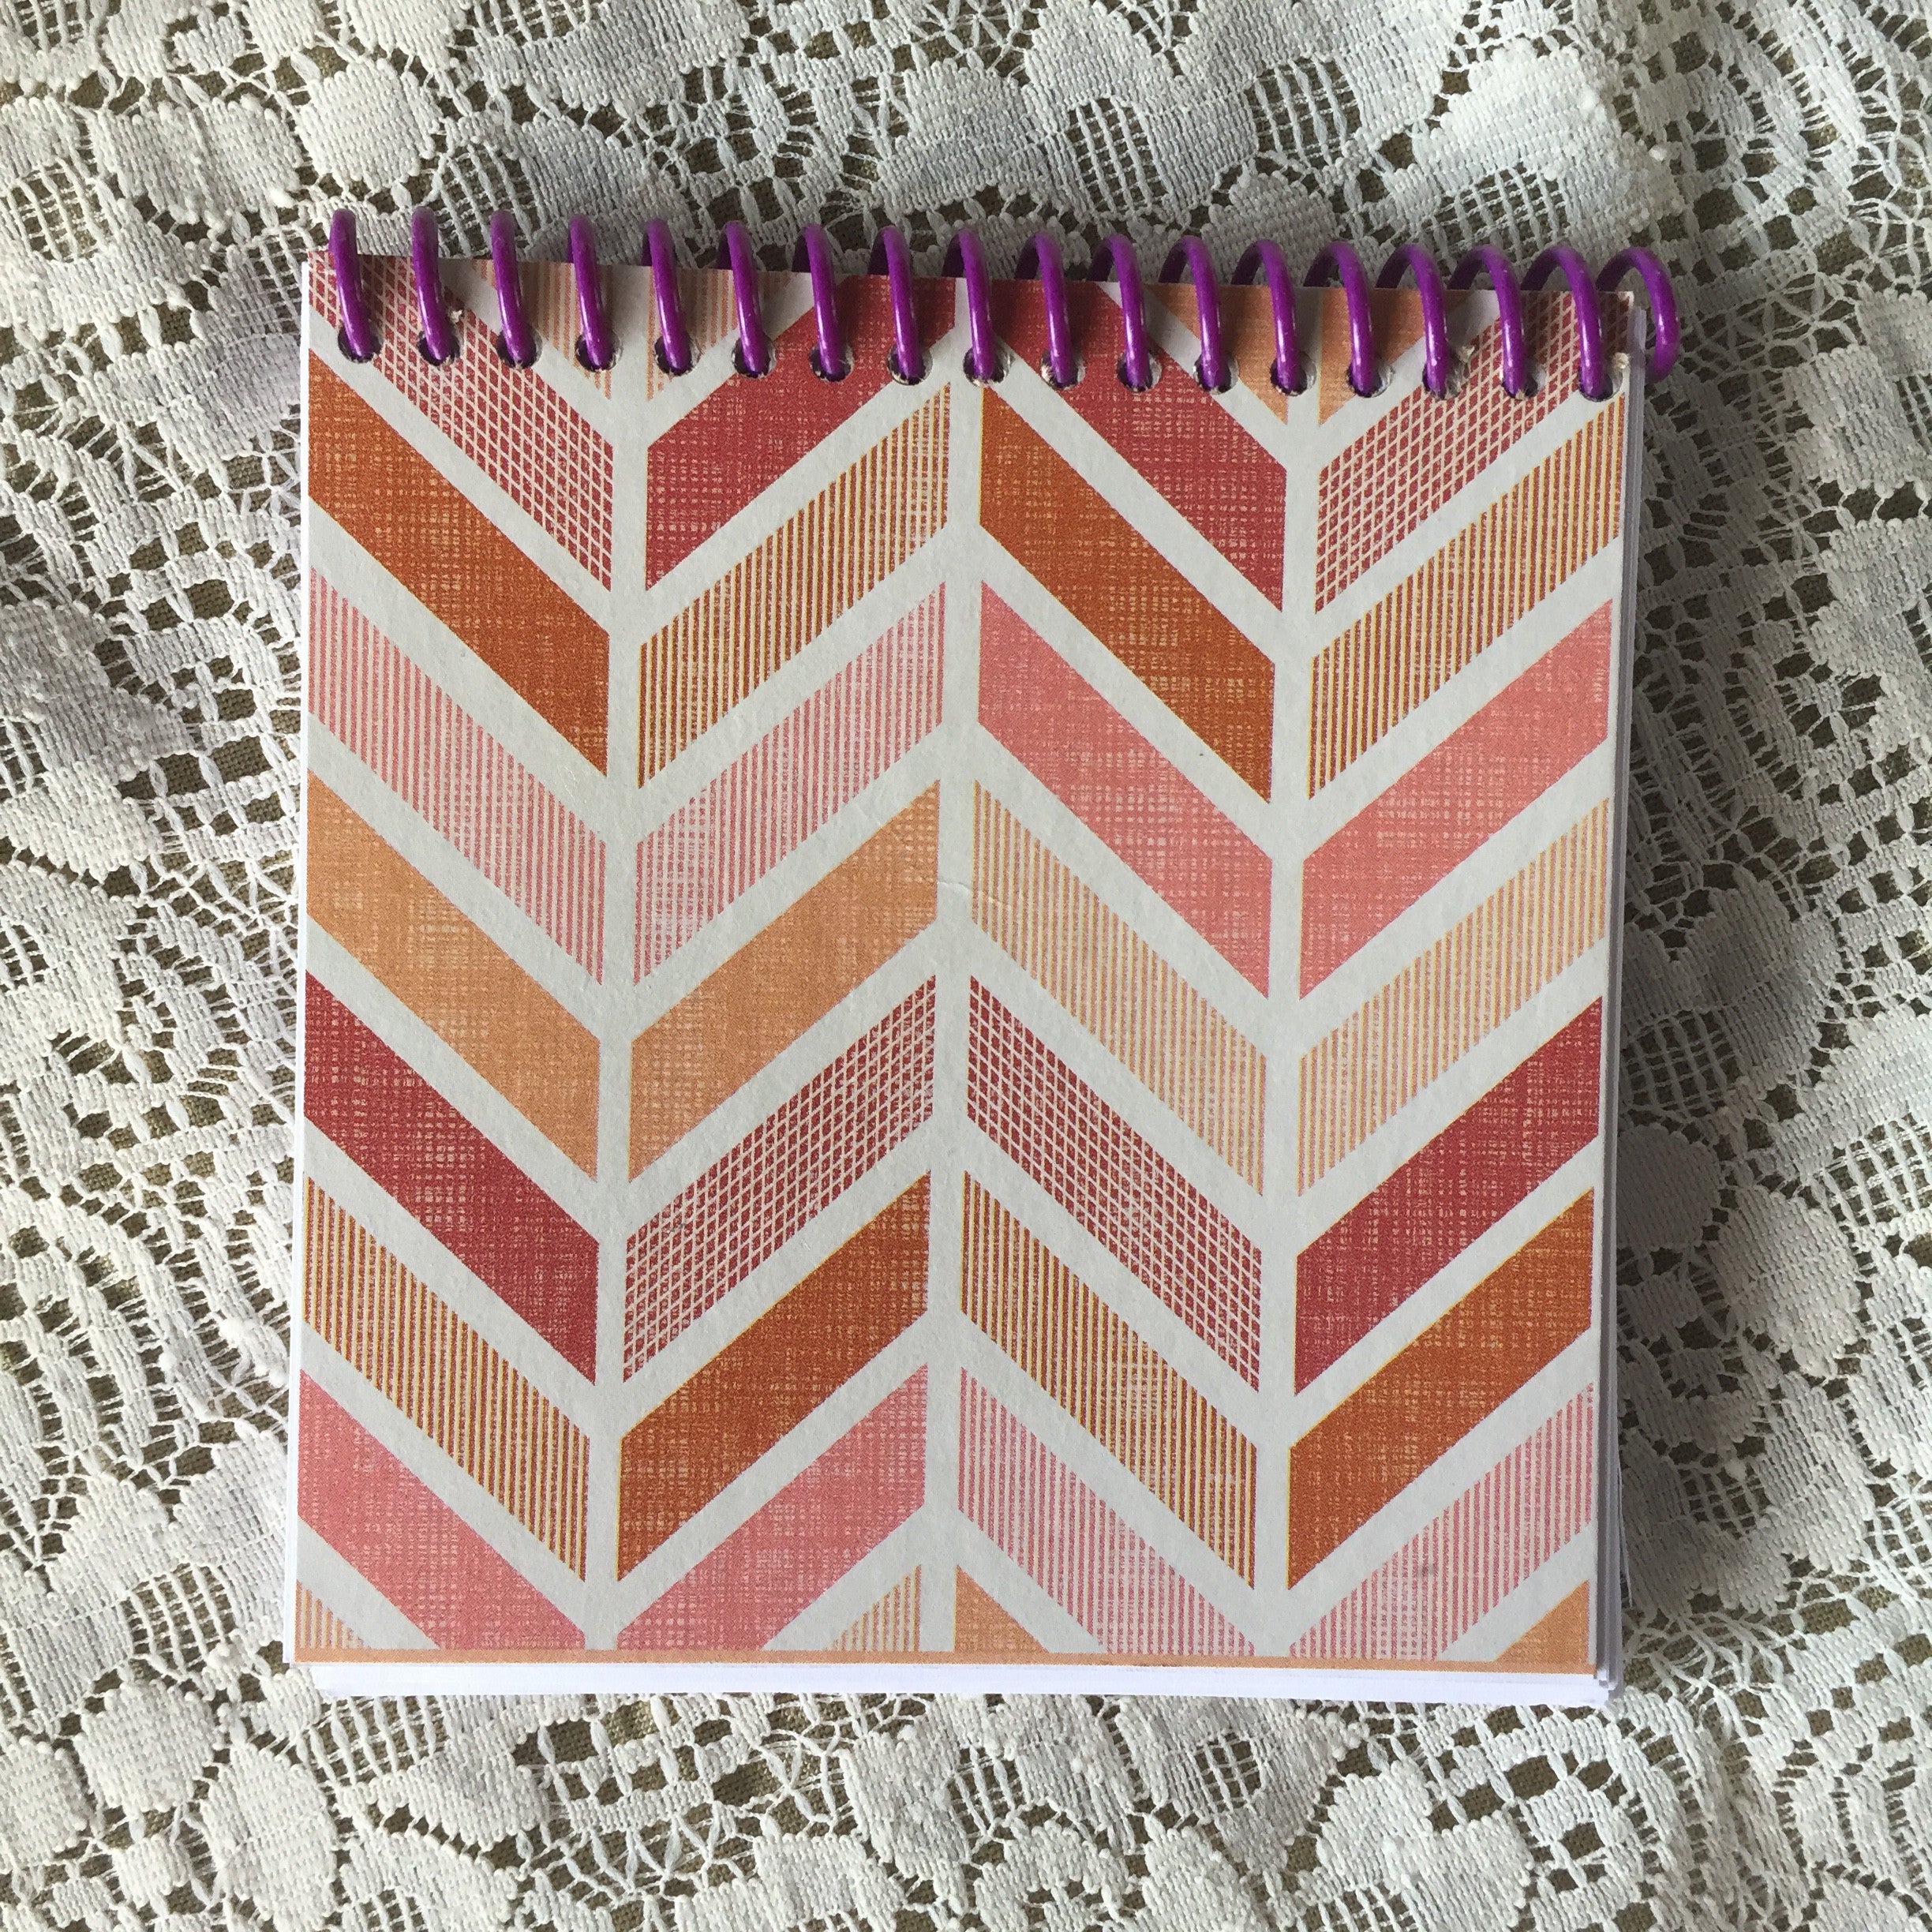 Geometric Recycled Tissue Box Notebook